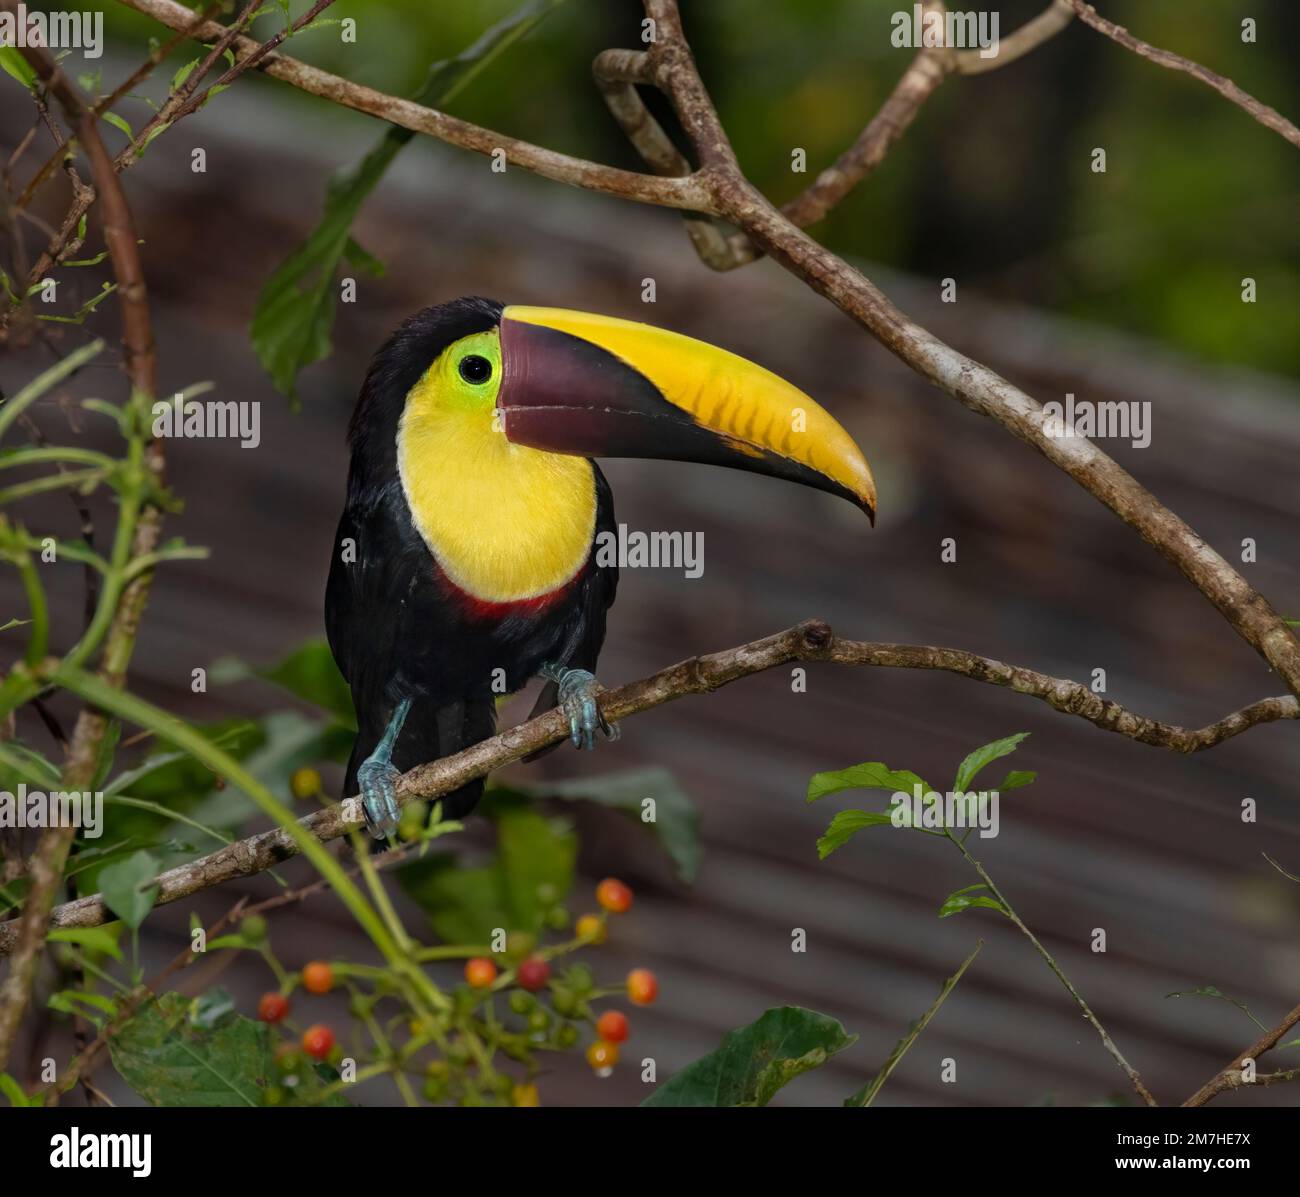 Yellow-throated toucan (Ramphastos ambiguus) perched on a tree branch, Costa Rica Stock Photo